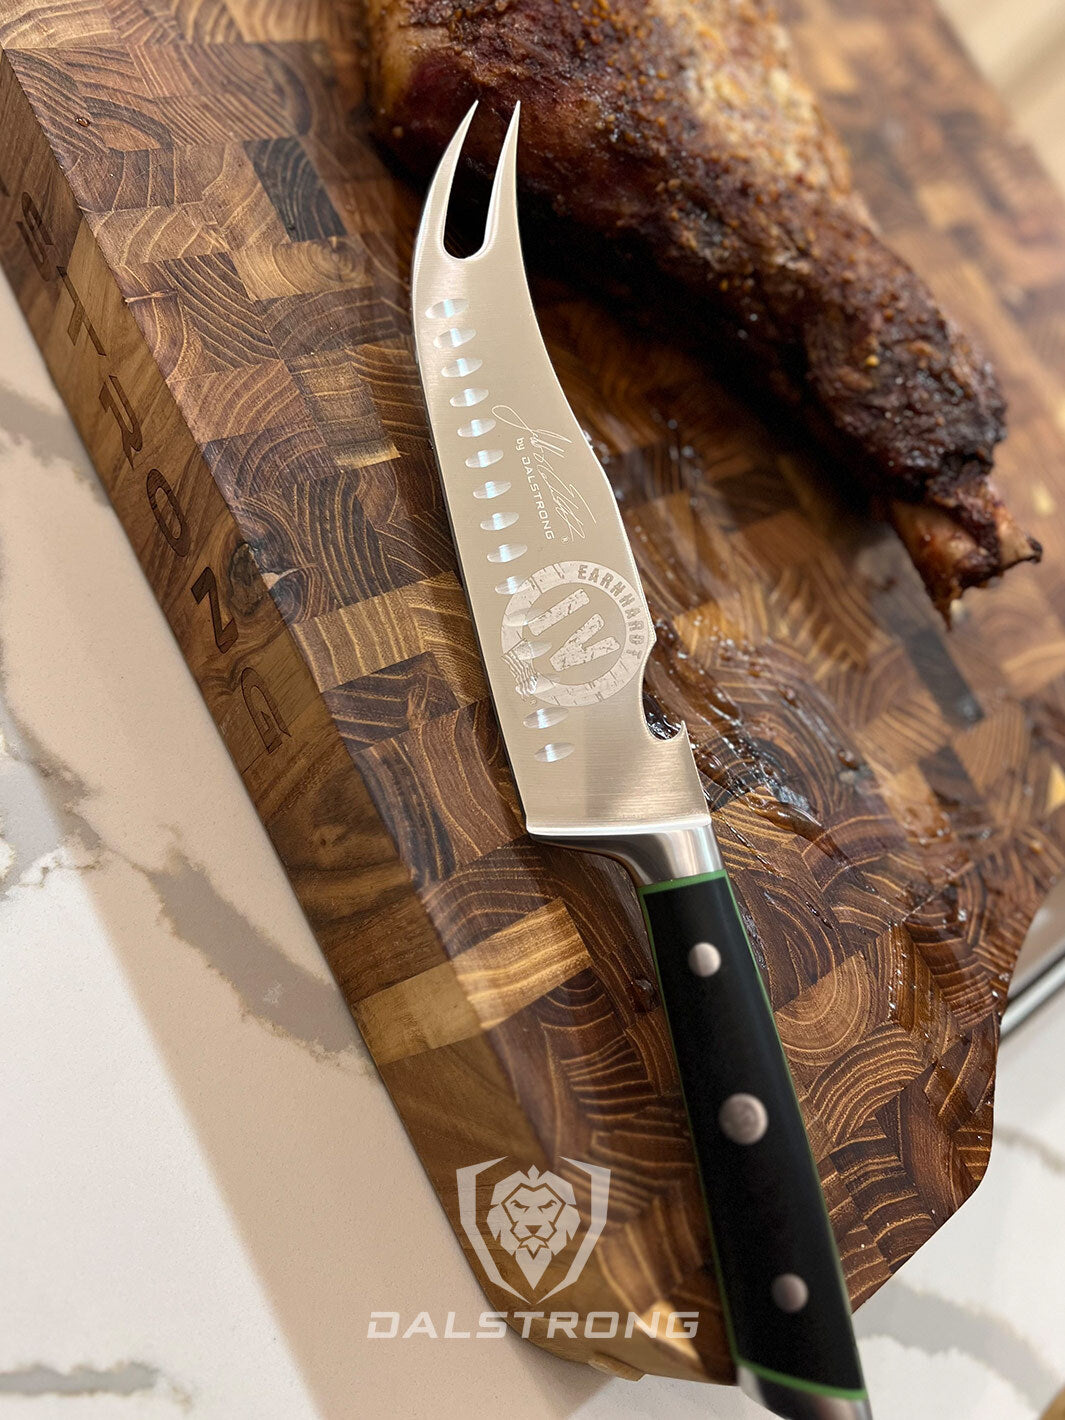 BBQ Pitmaster Knife 6.5 | Call of Duty © Edition | Forked Tip & Bottle  Opener | EXCLUSIVE COLLECTOR KNIFE | Dalstrong ©